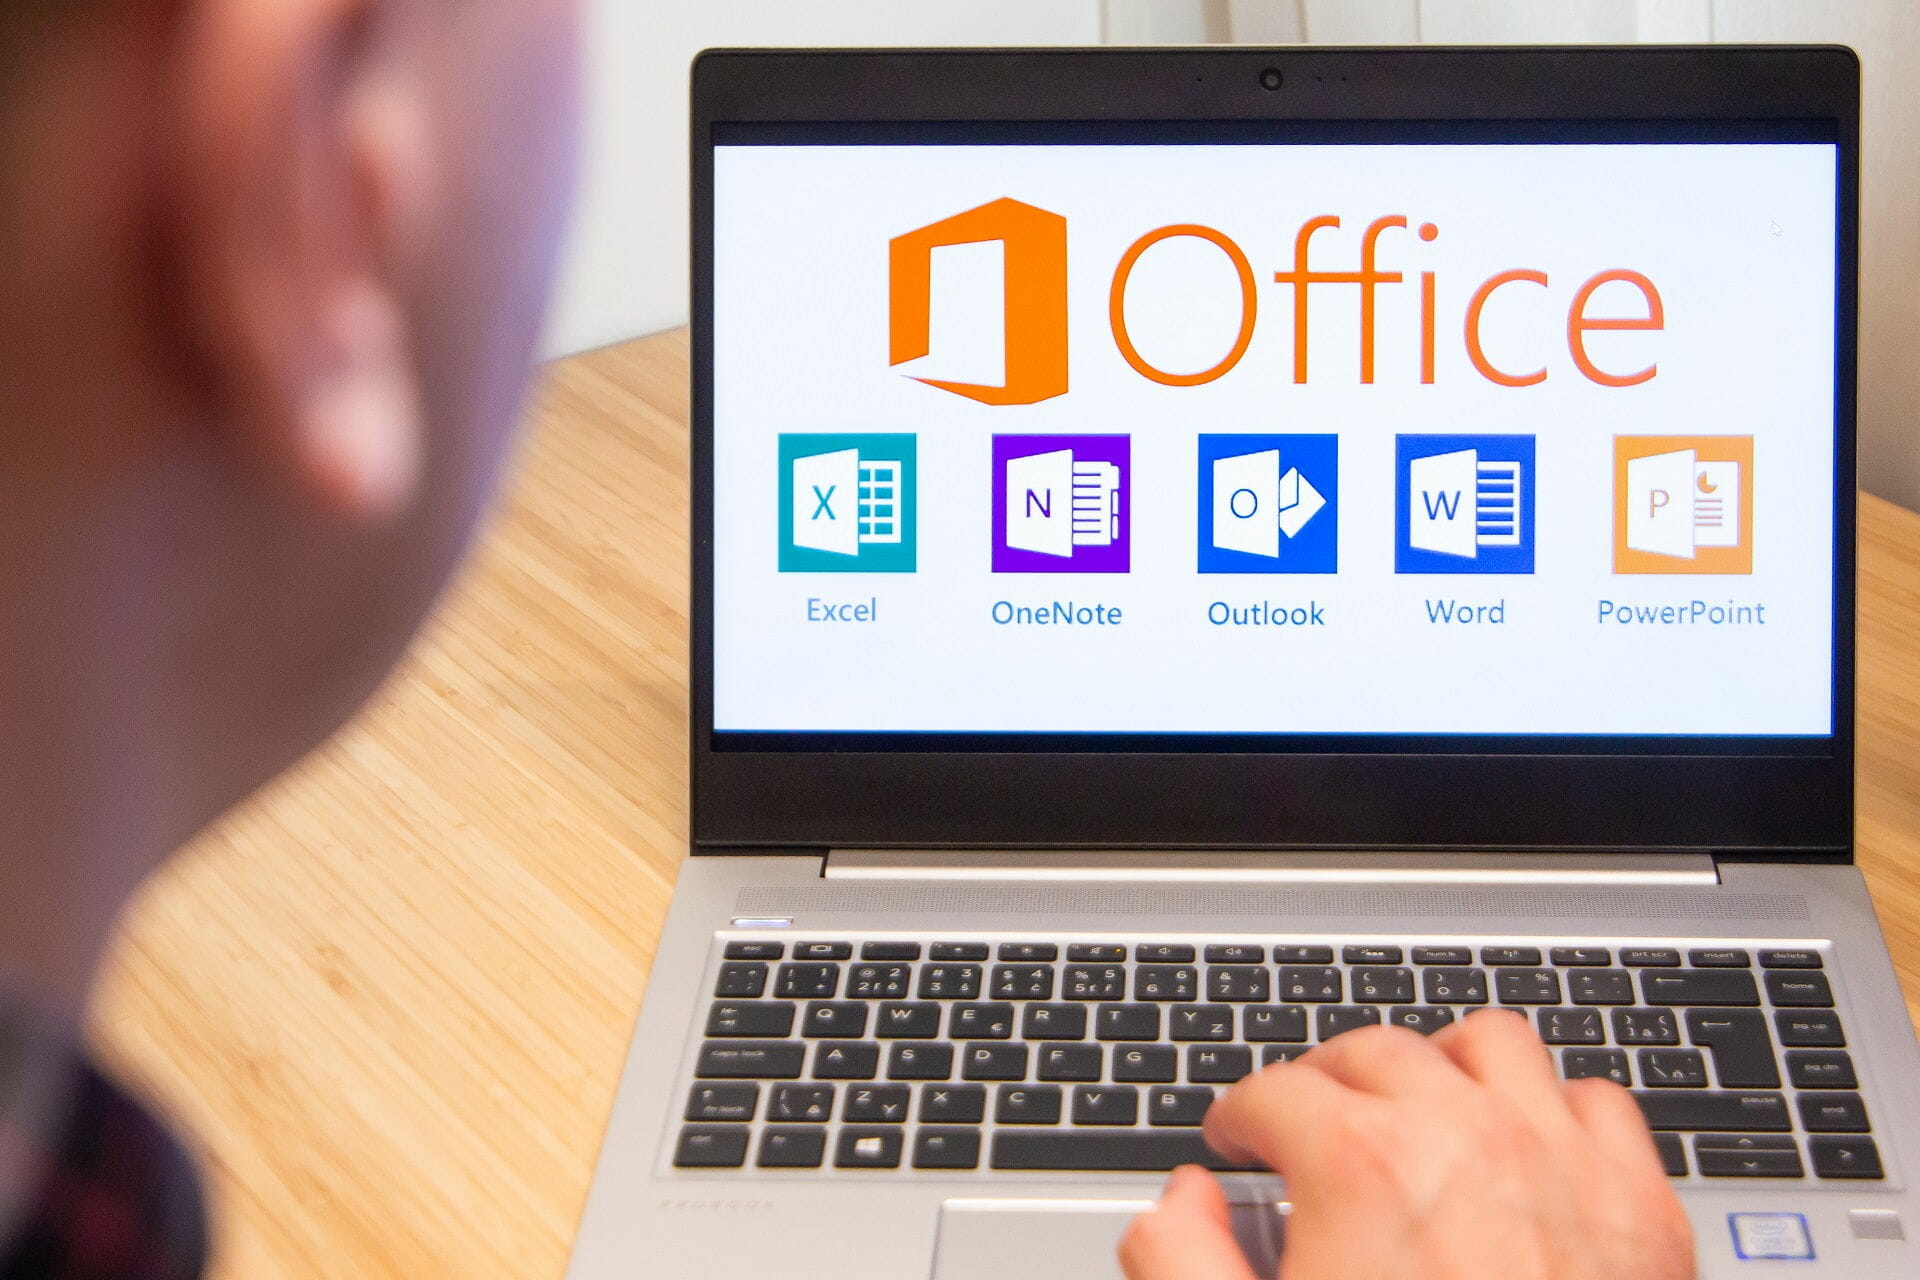 How to save graphical elements in Microsoft Office as pictures